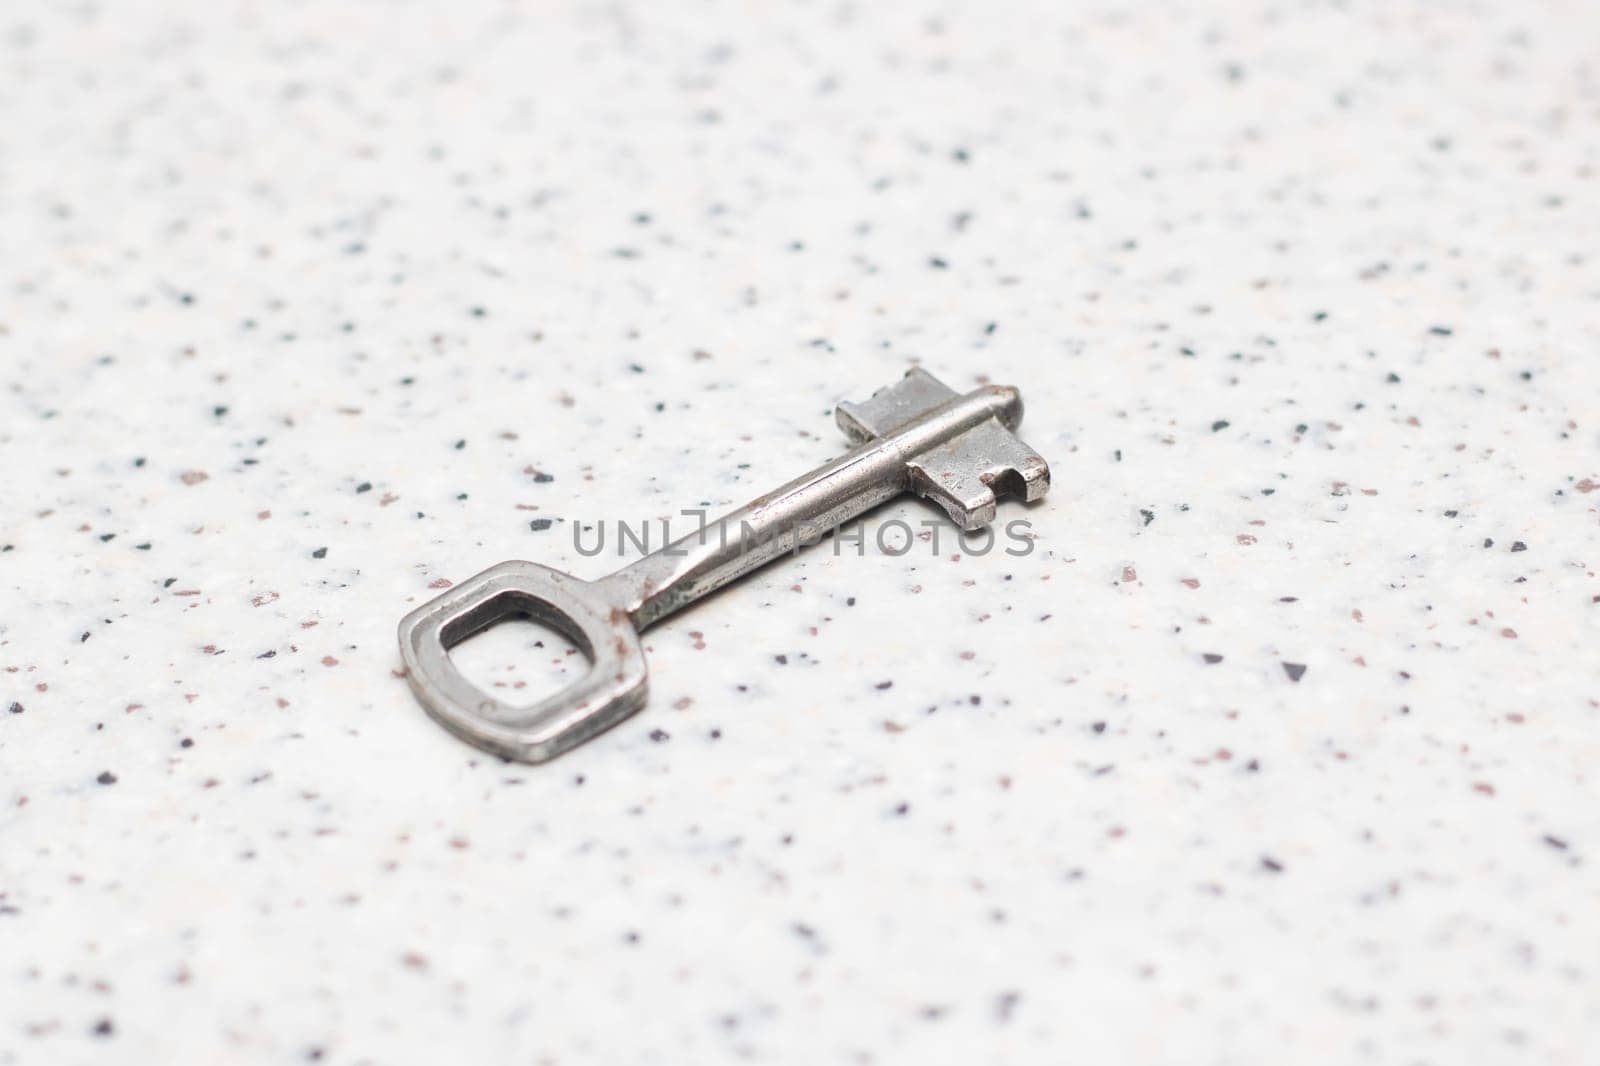 Close up of a nickel key on a white surface, a shiny metal accessory by Vera1703